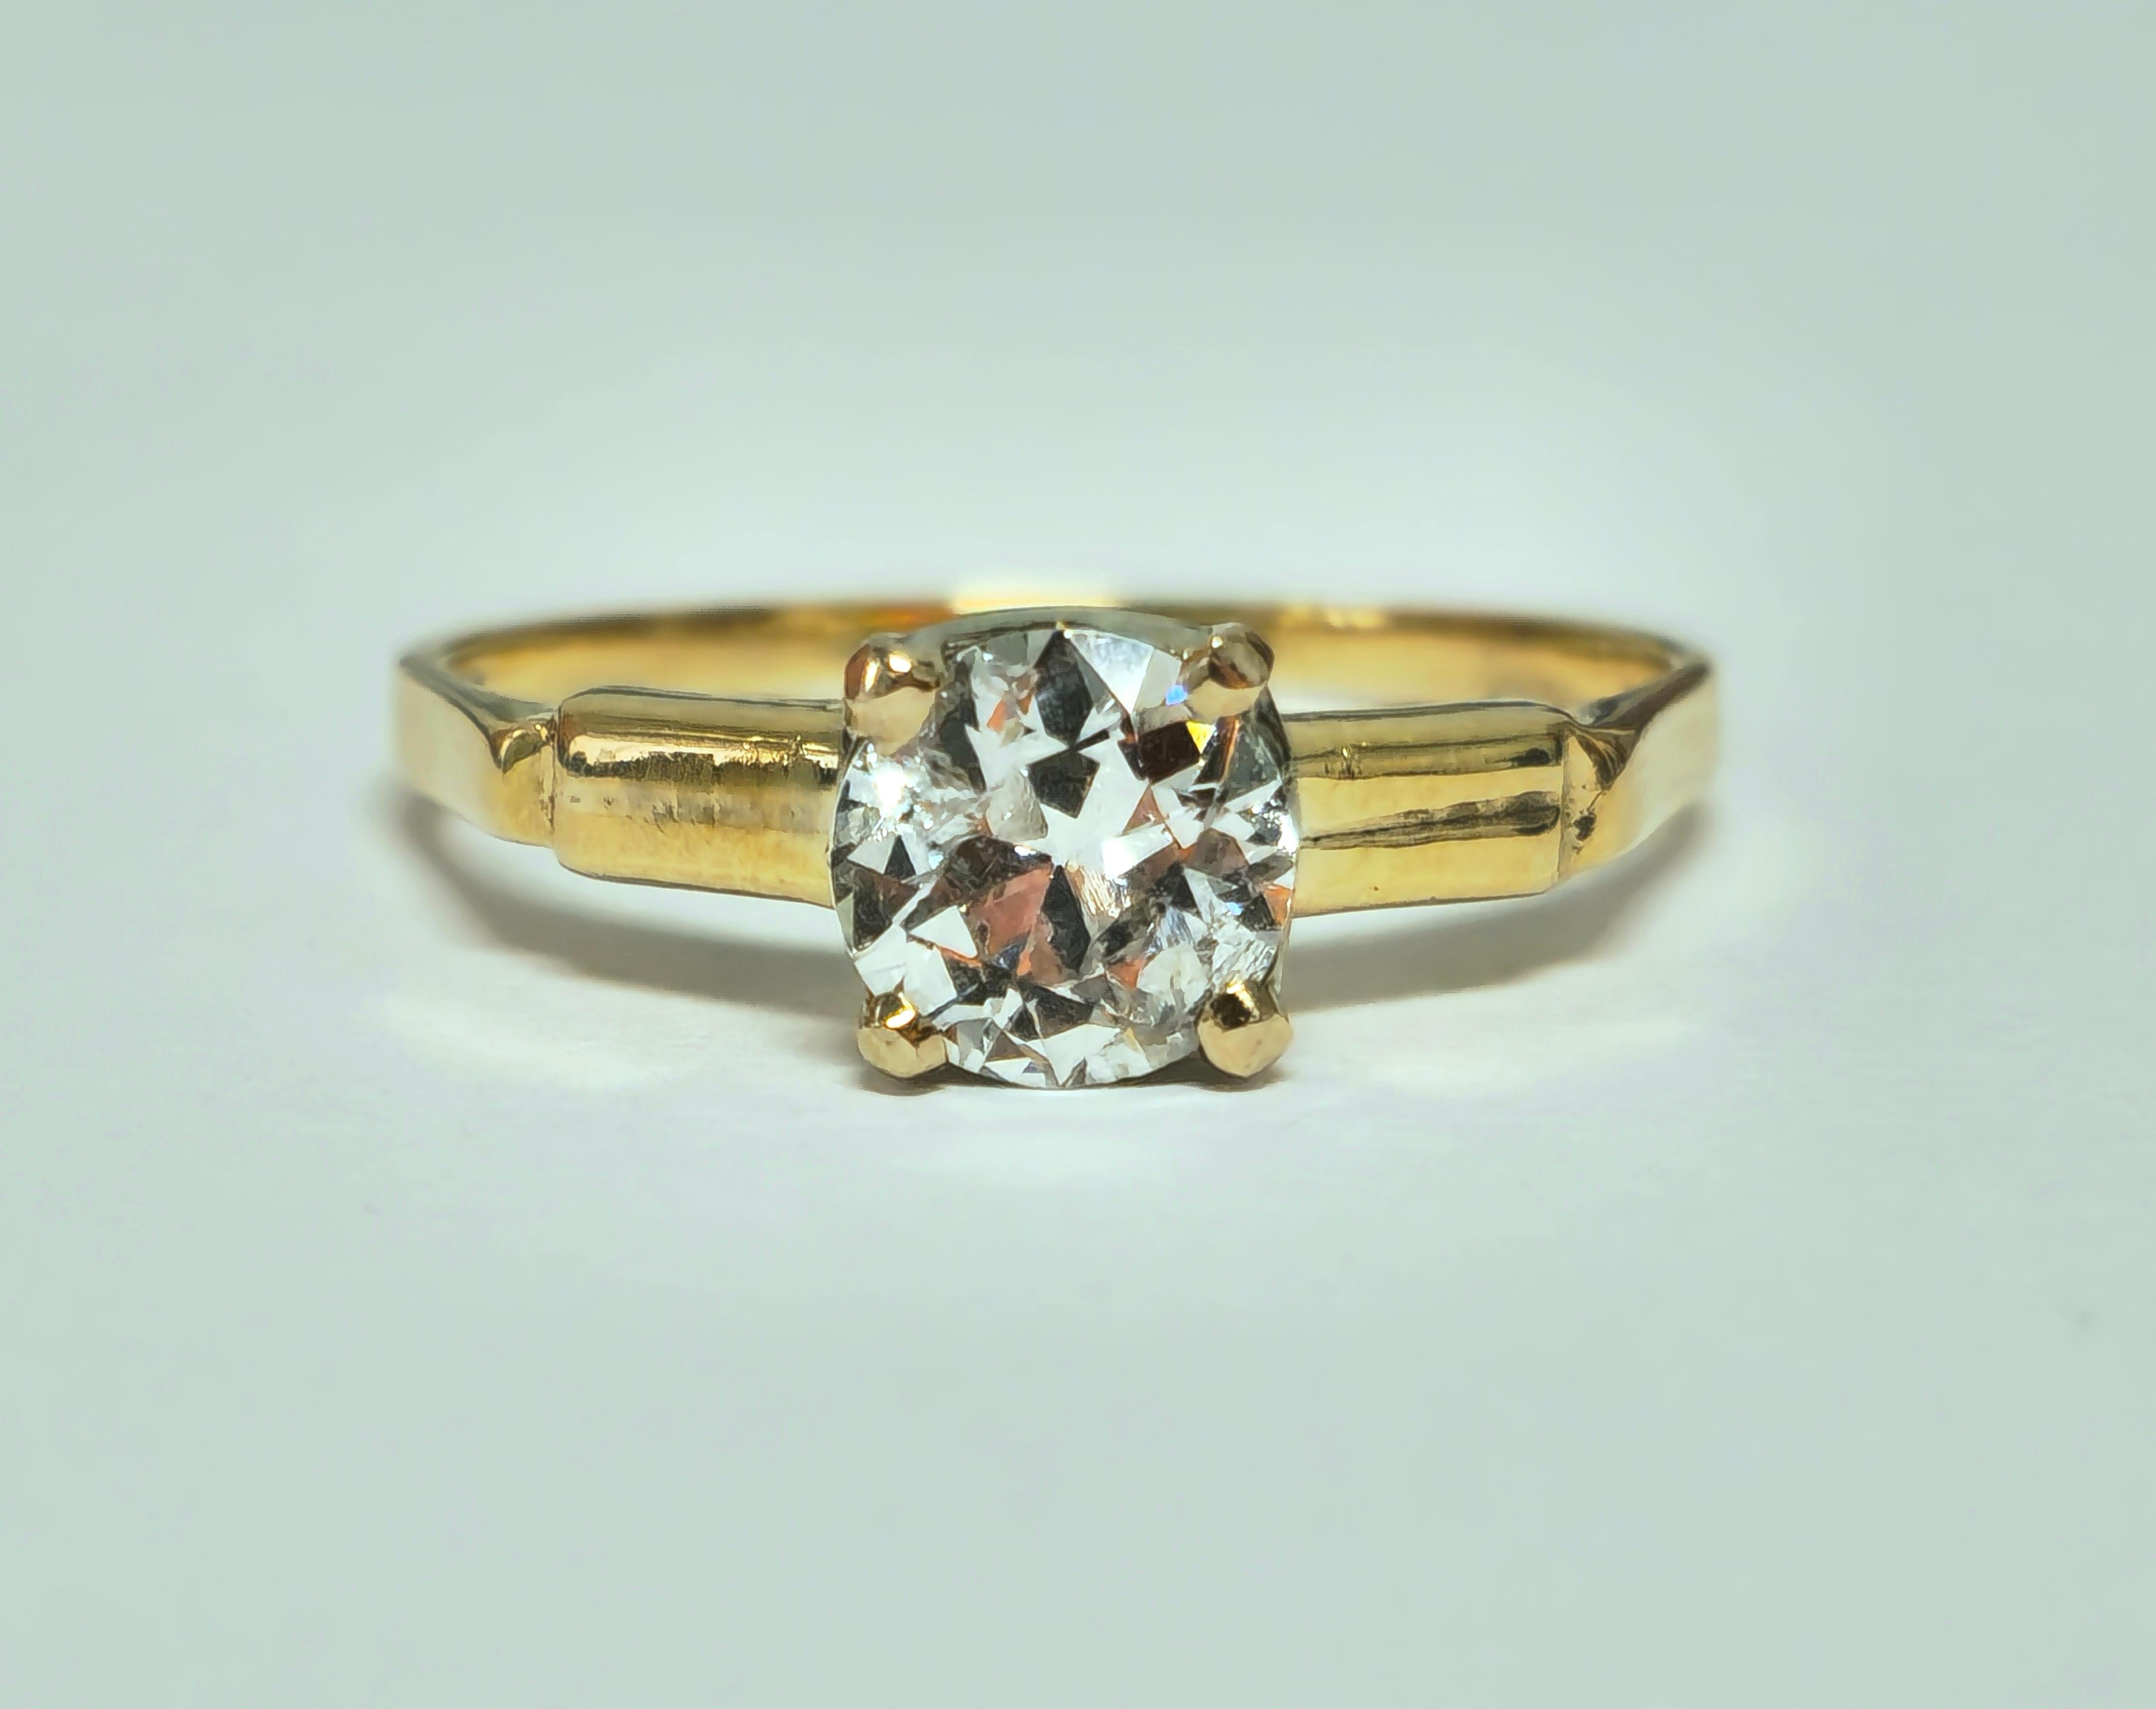 Crafted from radiant 14k yellow gold, this vintage diamond ring boasts a charming 1.03 carat single-cut diamond, adding a touch of timeless elegance. With SI1 clarity and G color, the diamond showcases its natural beauty. Perfect for any occasion,